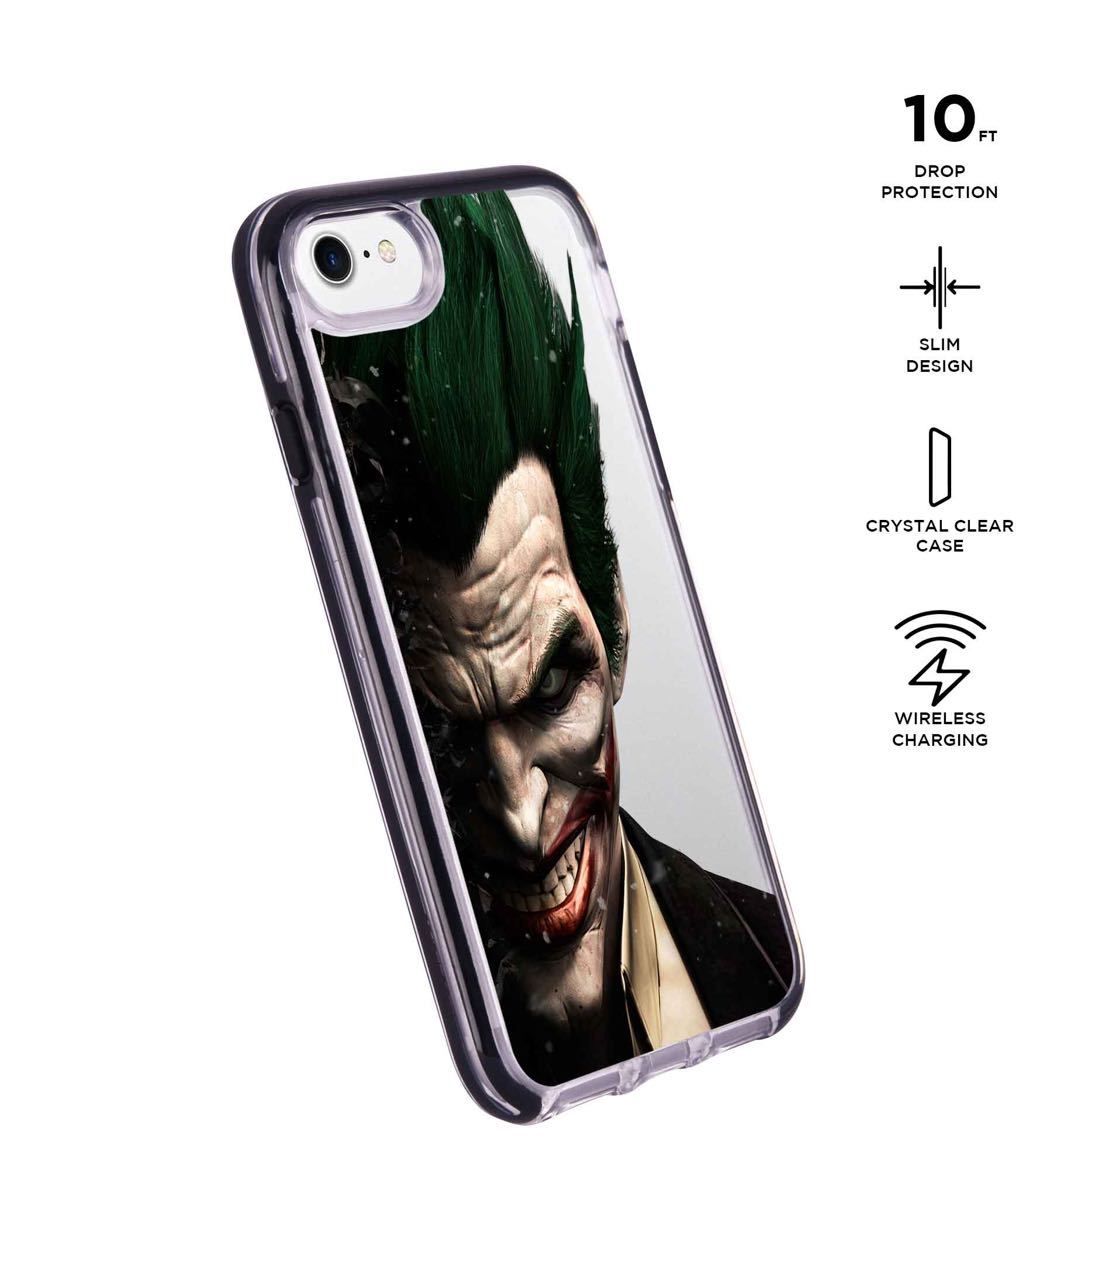 Joker Withers - Extreme Phone Case for iPhone 7